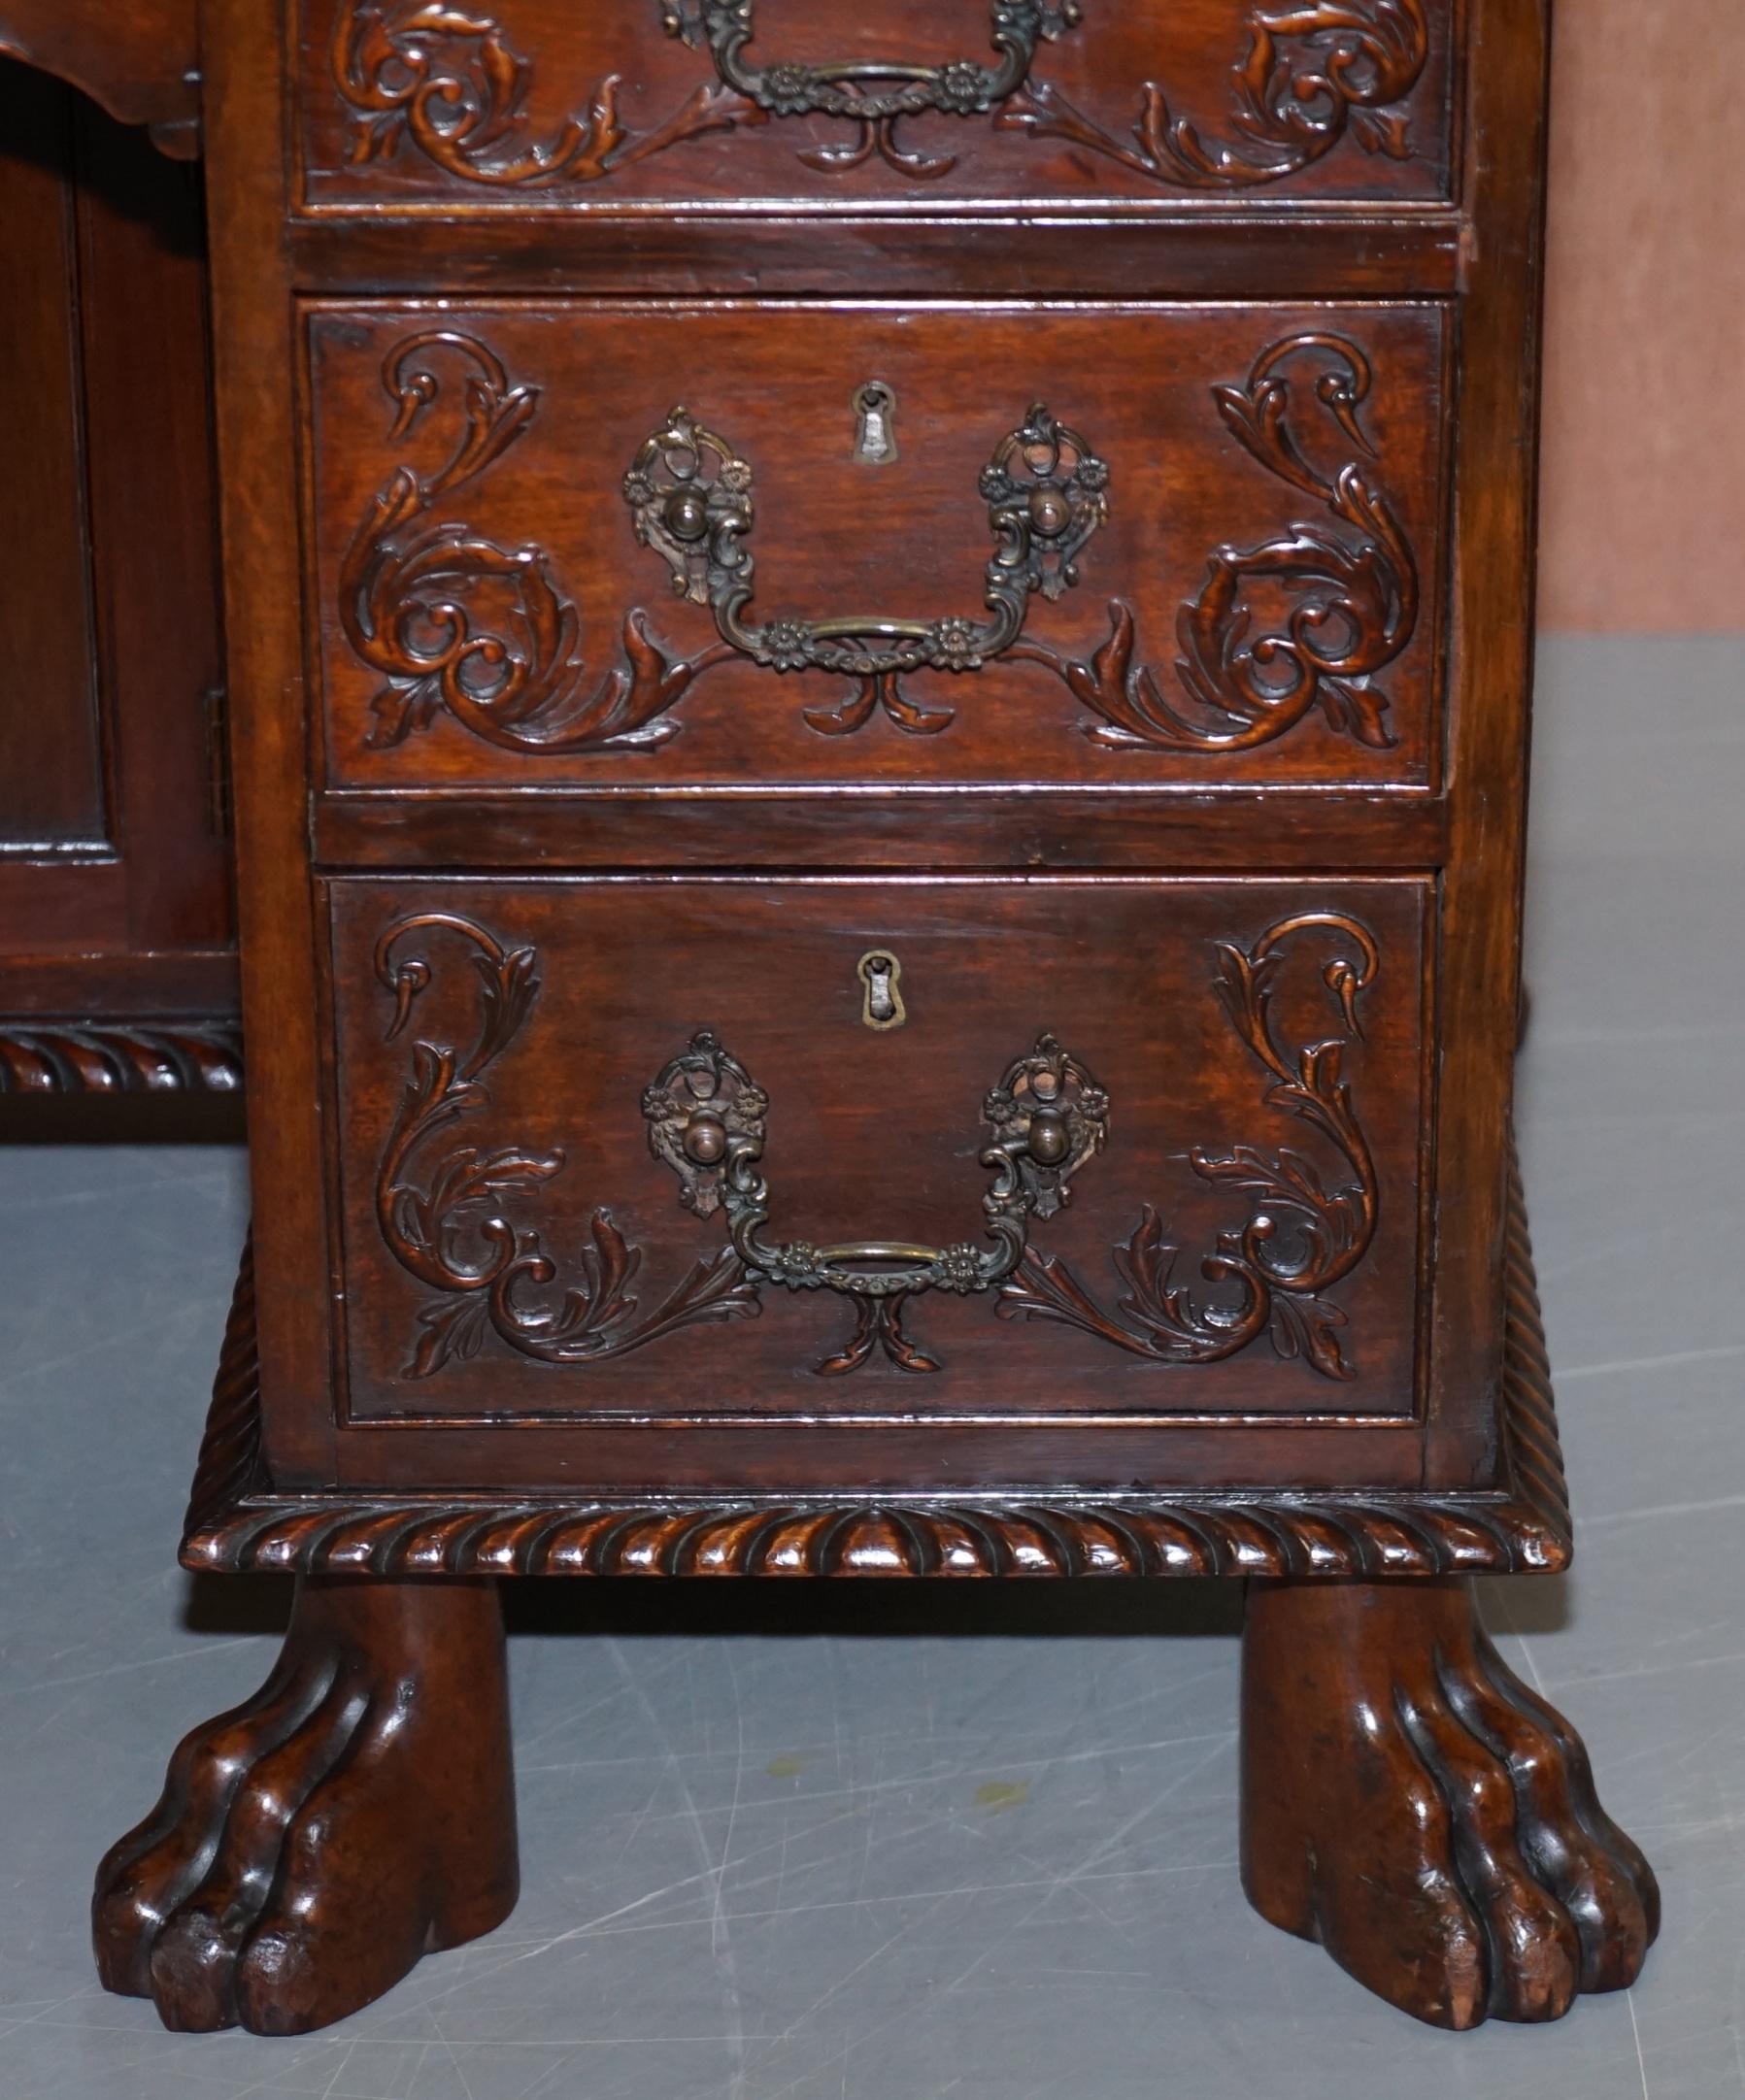 Hardwood Sublime Hand Carved from Top to Bottom Antique Victorian 1850 Knee Hole Desk For Sale